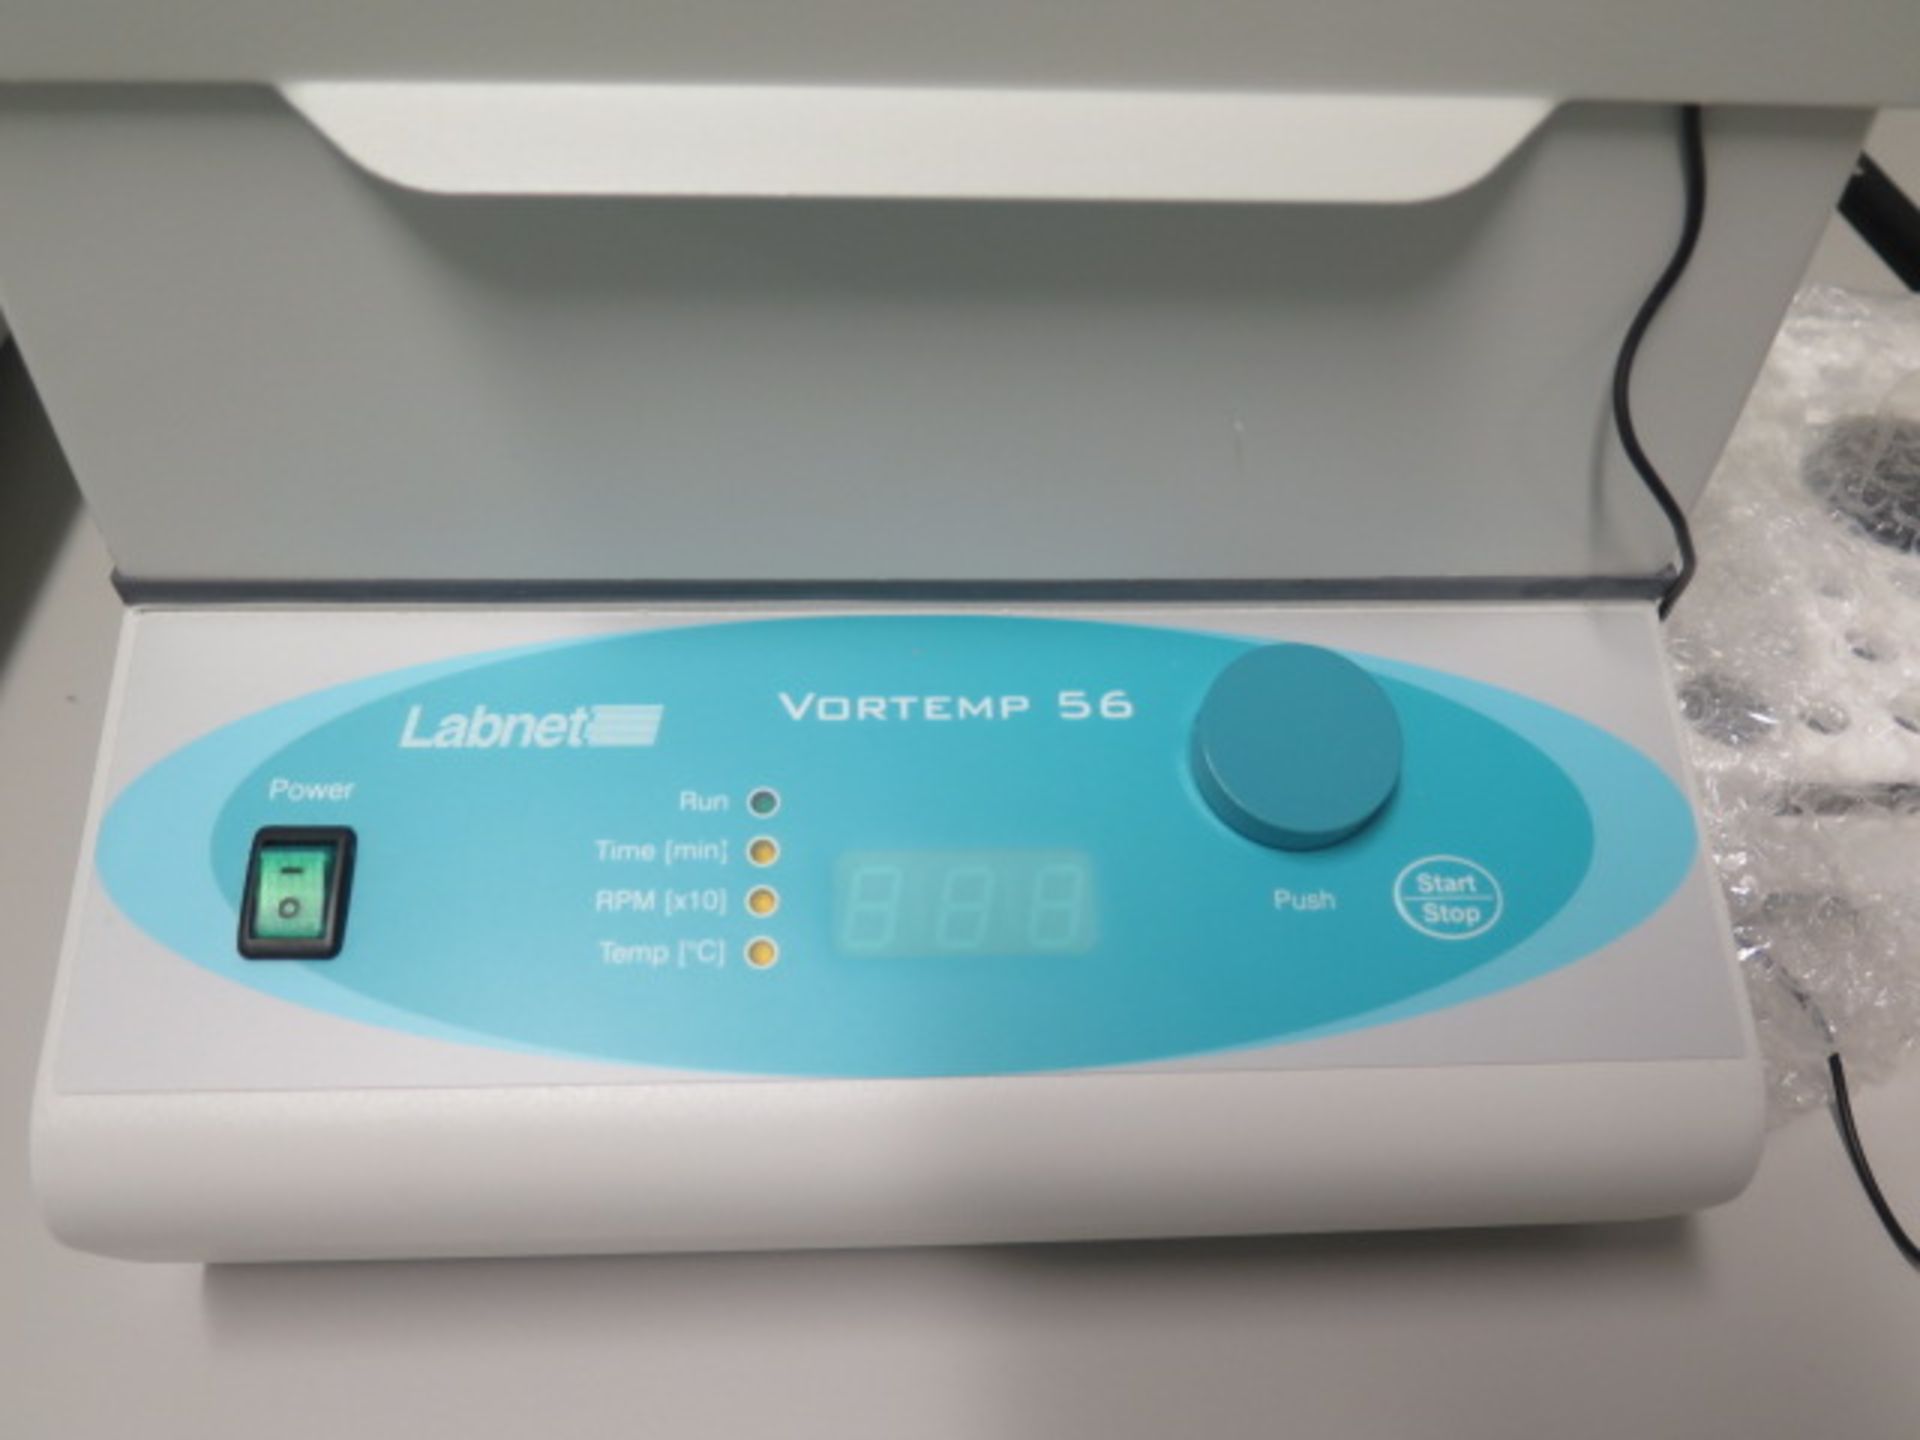 Labnet Vortemp 56 mdl. S2056-A Incubator / Shaker s/n 08051809 | Loading Price: Hand Carry or - Image 2 of 5